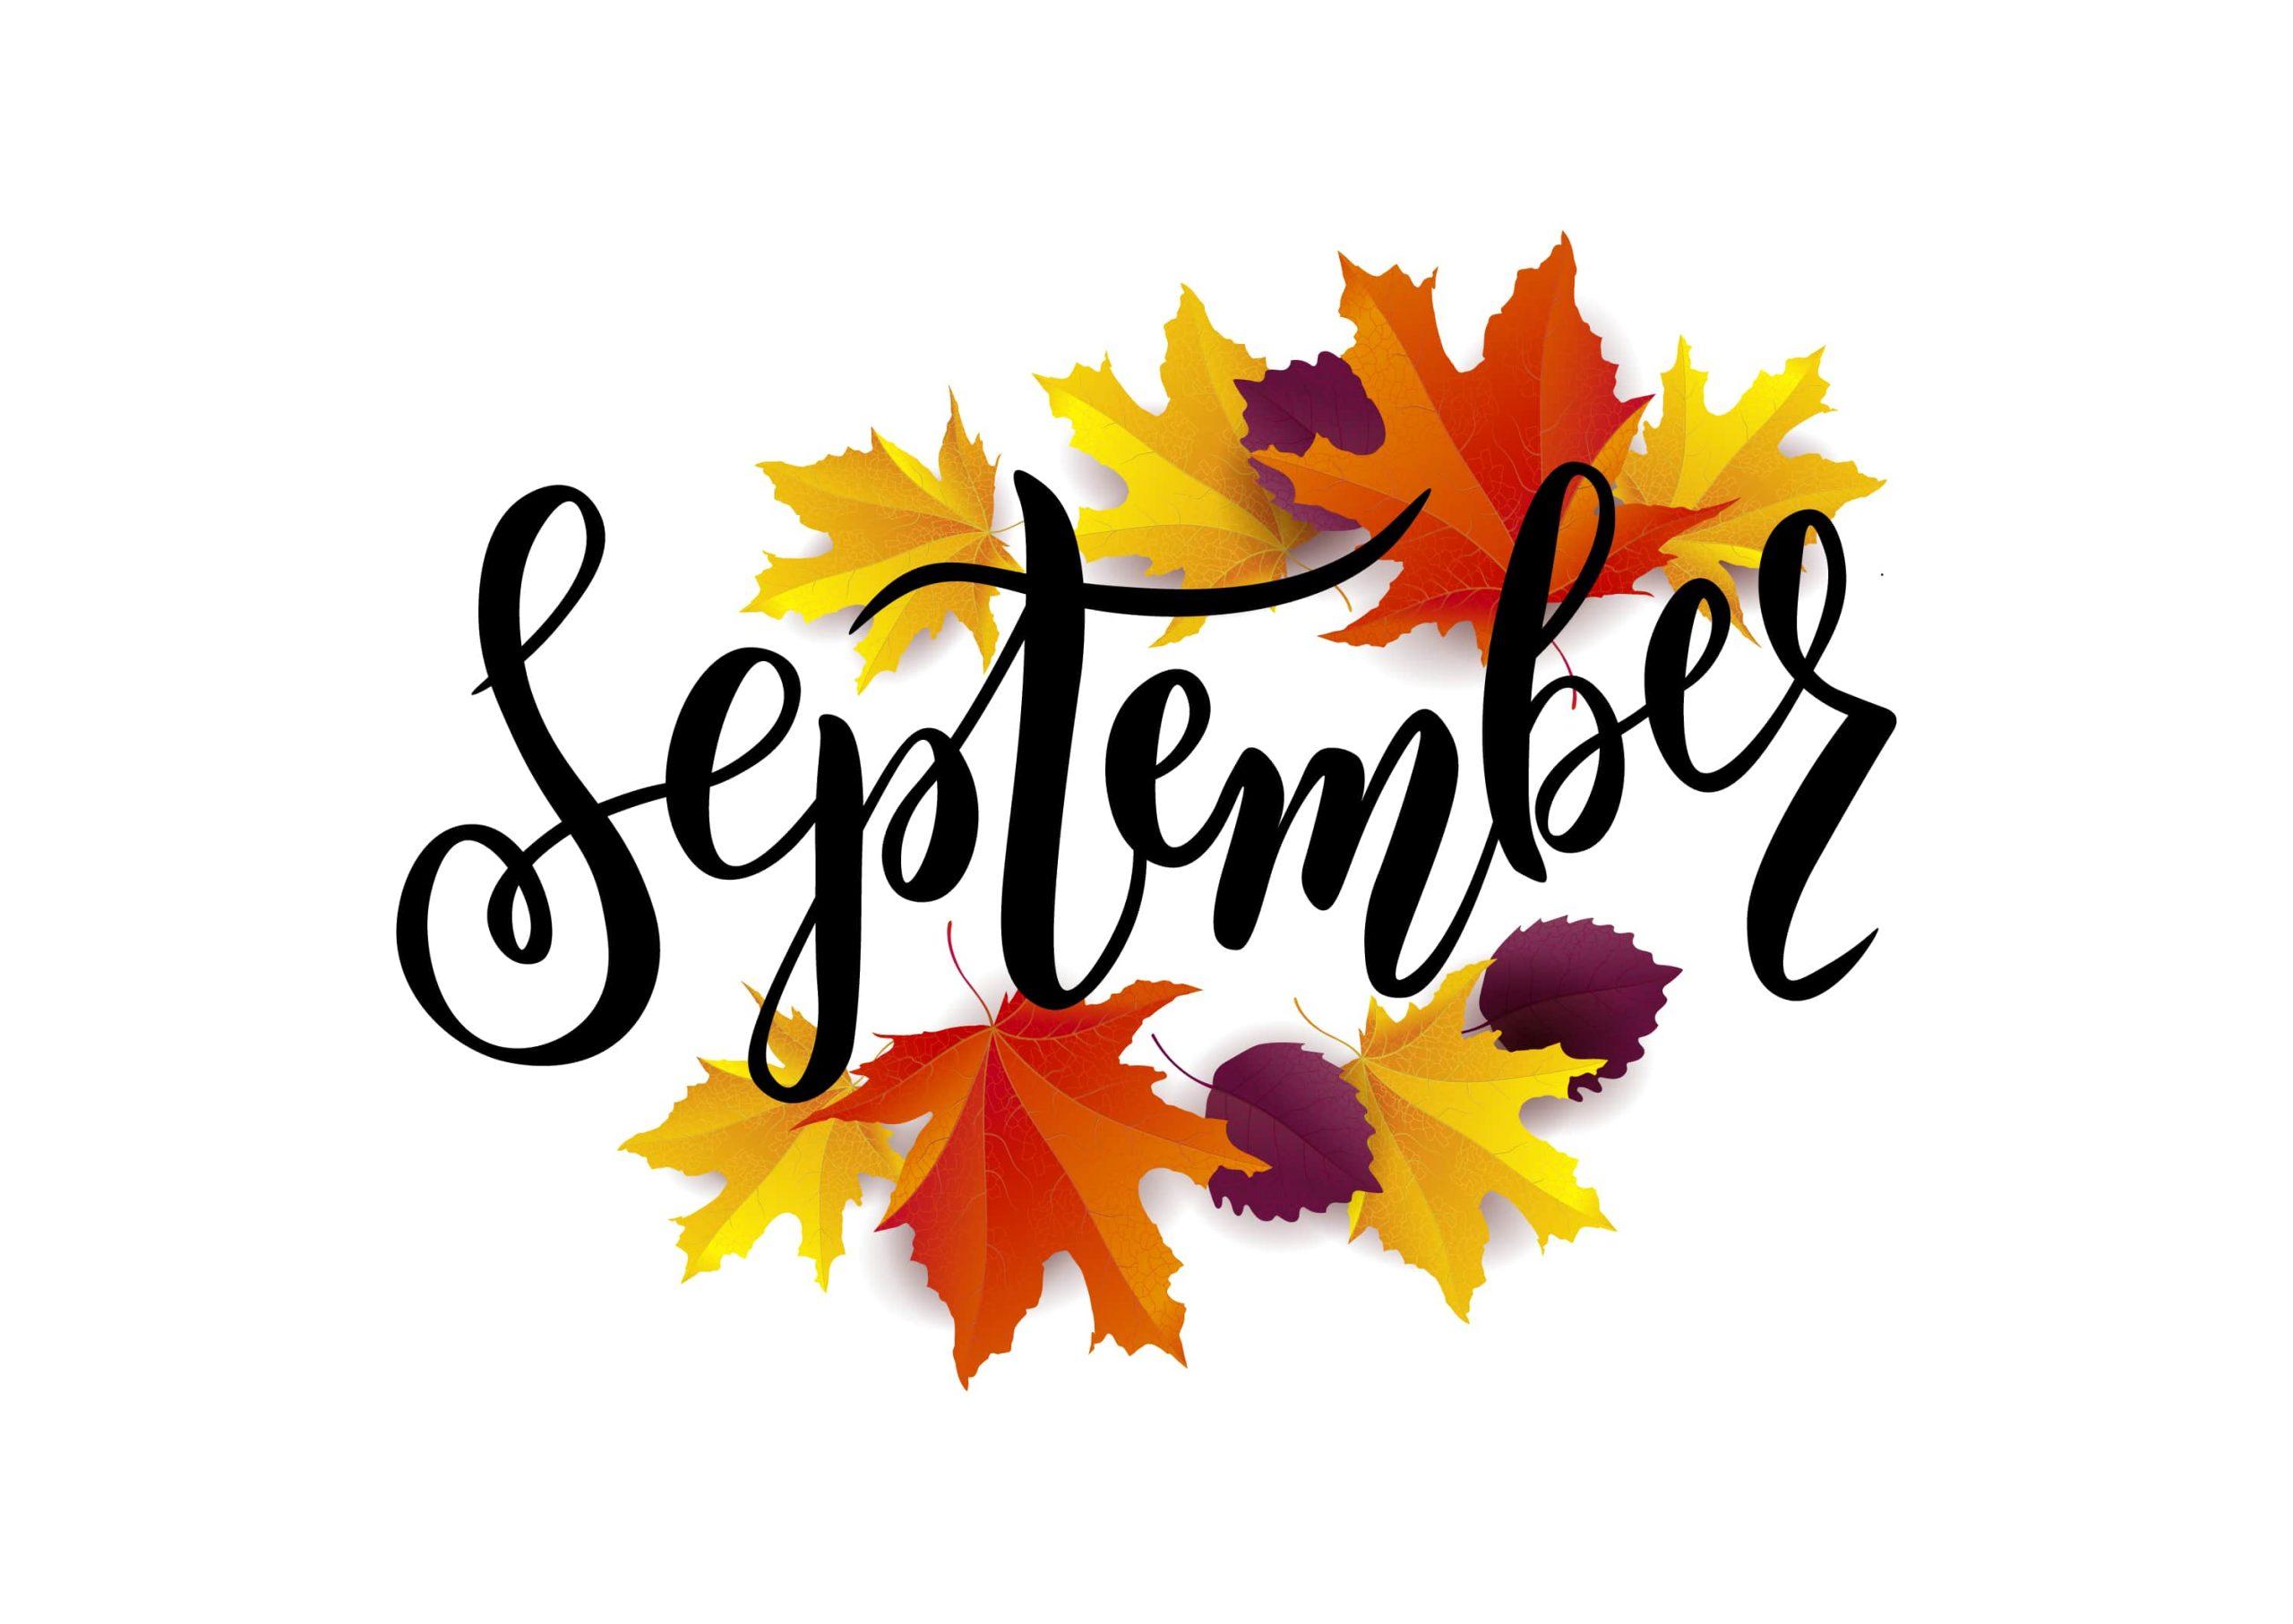 Did You Know September Spells Harvest Time For You?